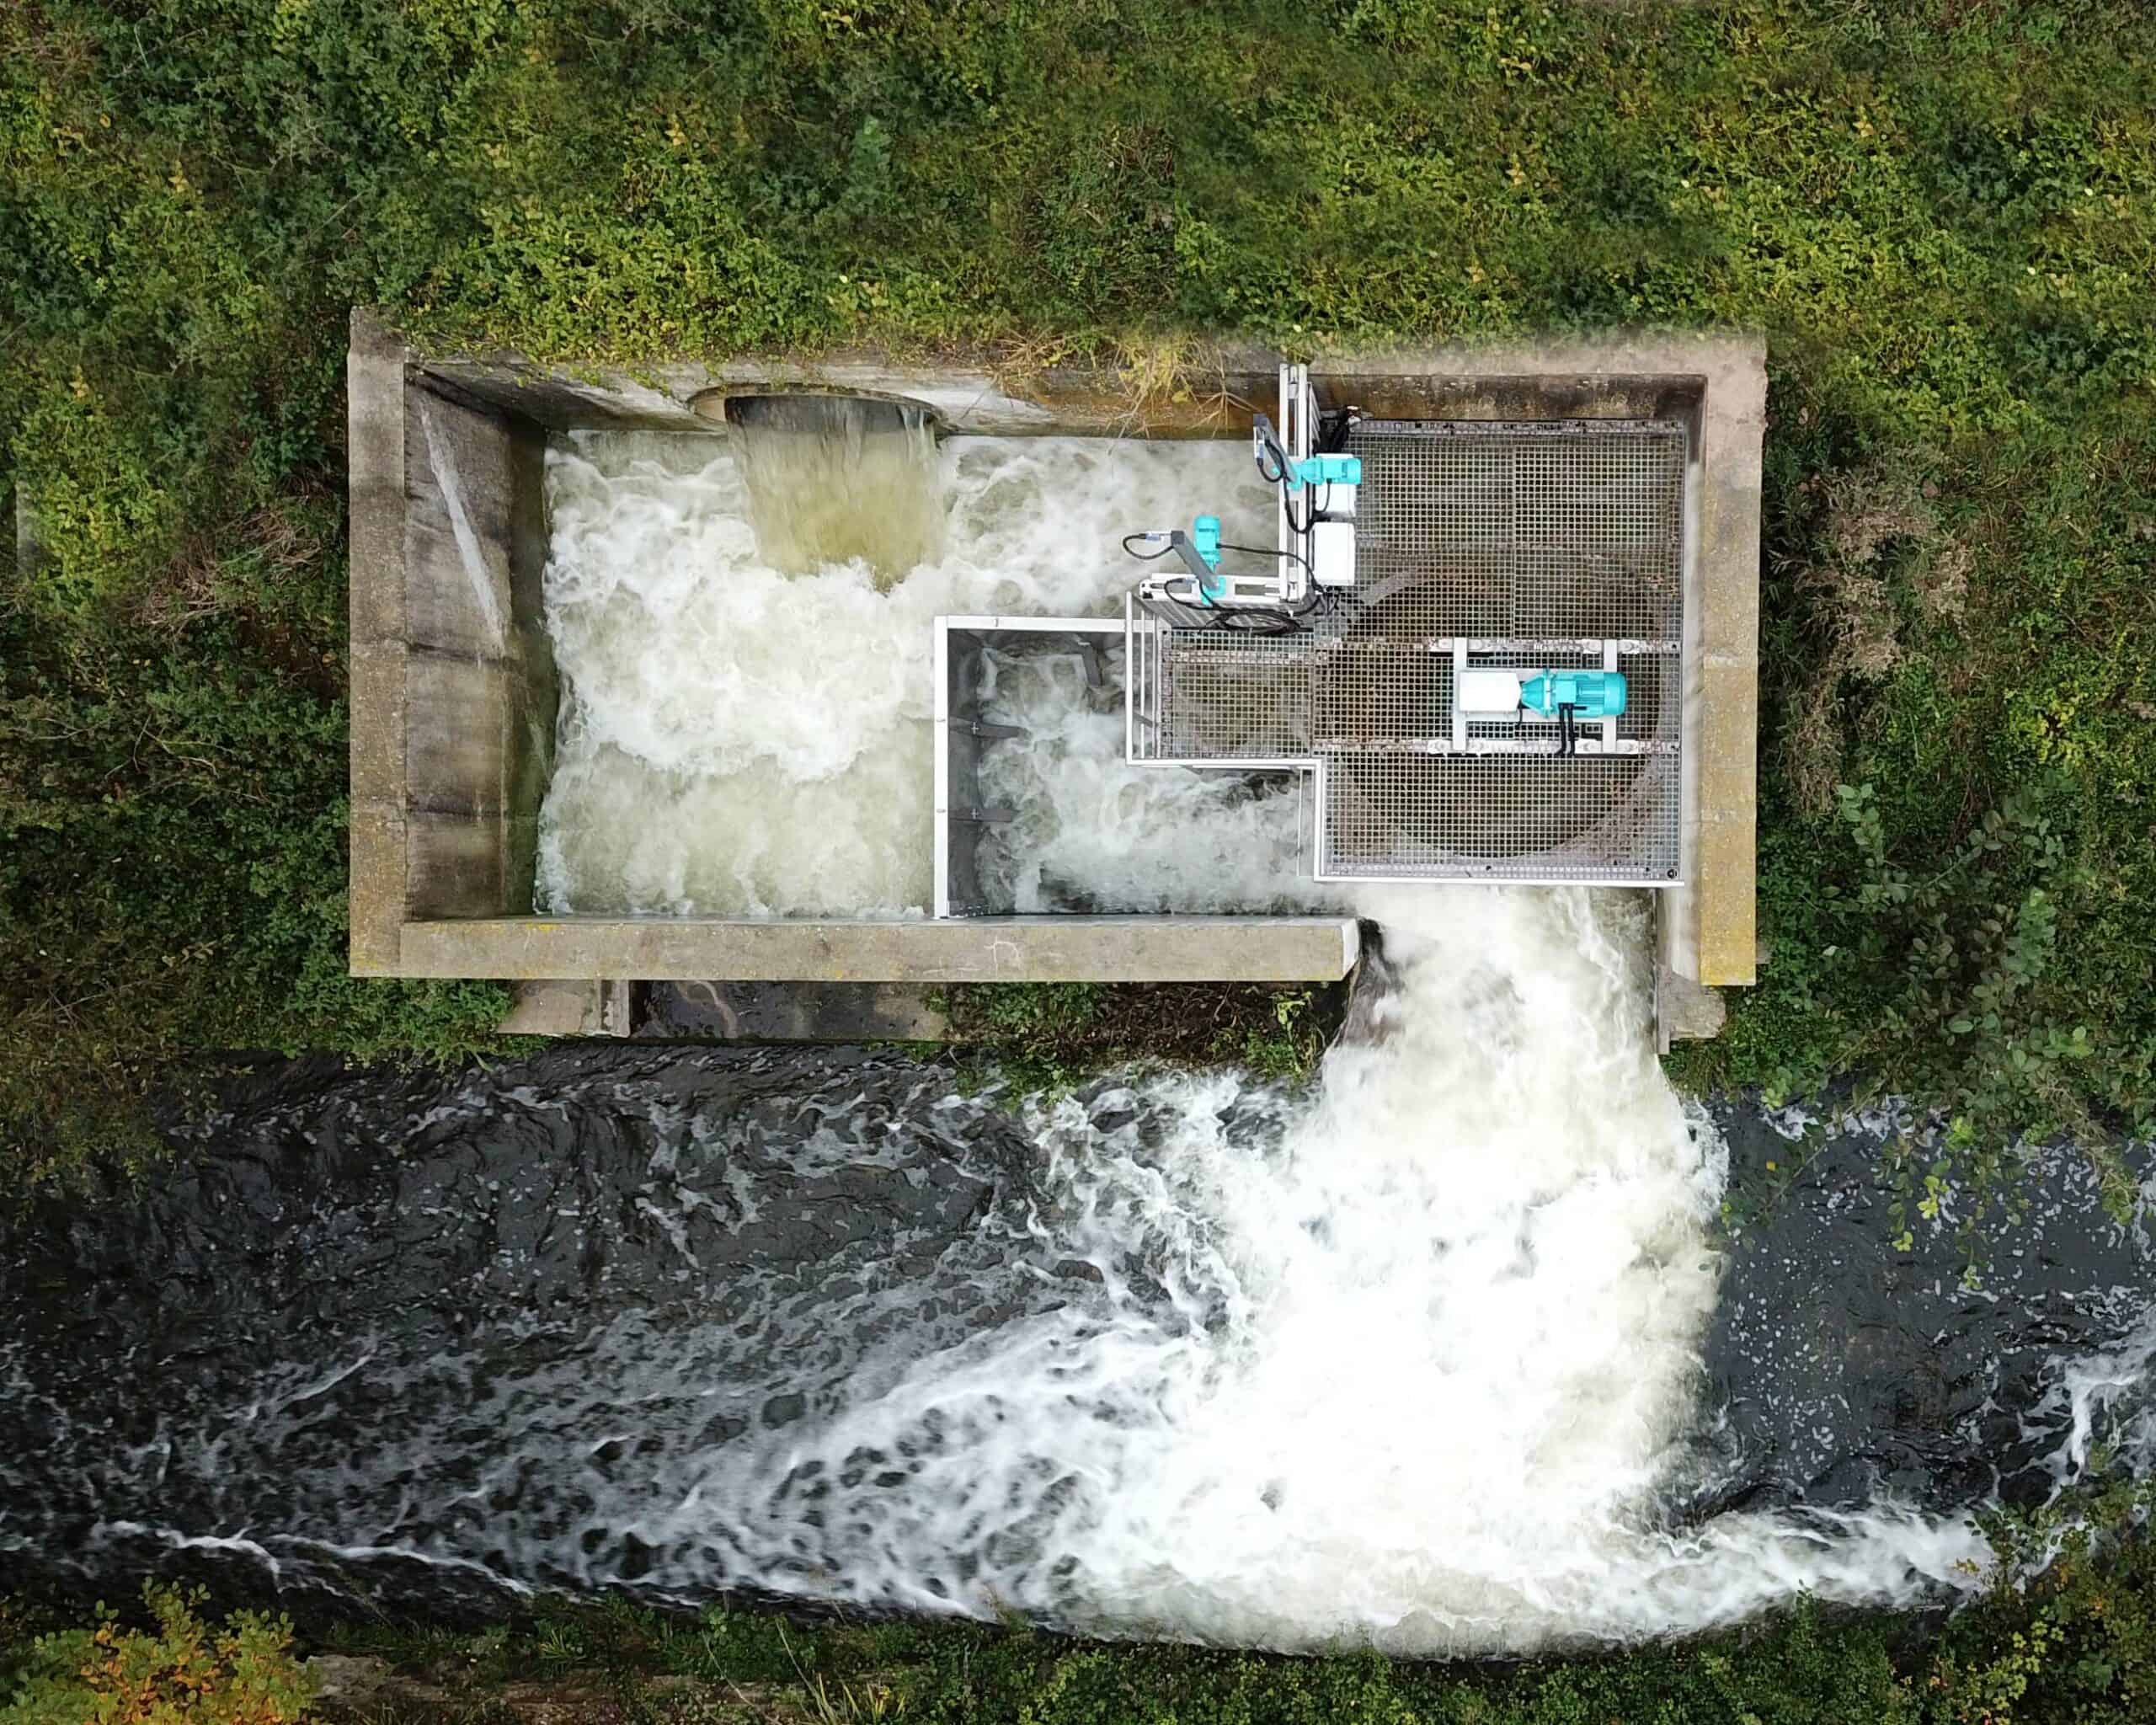 Small hydropower plant in stream behind homes becoming more popular